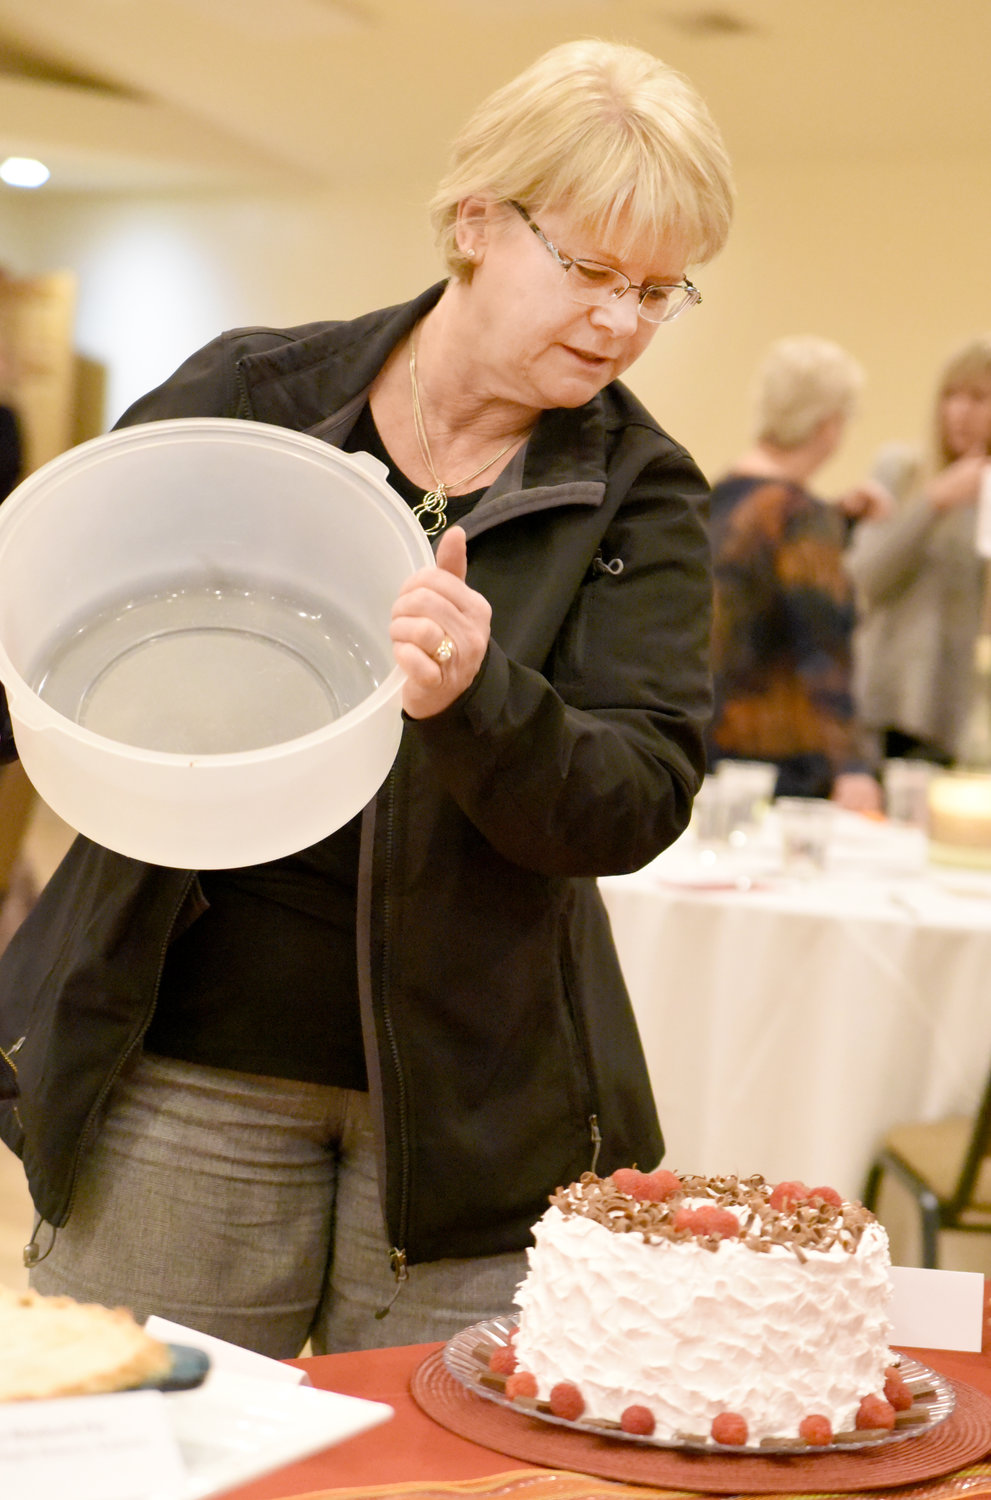 Lois Kasdorf reveals her Chocolate Angel Food Cake at the Washington County Community Foundation’s Chef Spotlight dinner on Nov. 4. The desserts, auctioned off by Dwight Duwa of Duwa’s Auction Service, benefitted both the foundation and the Kalona Historical Village.